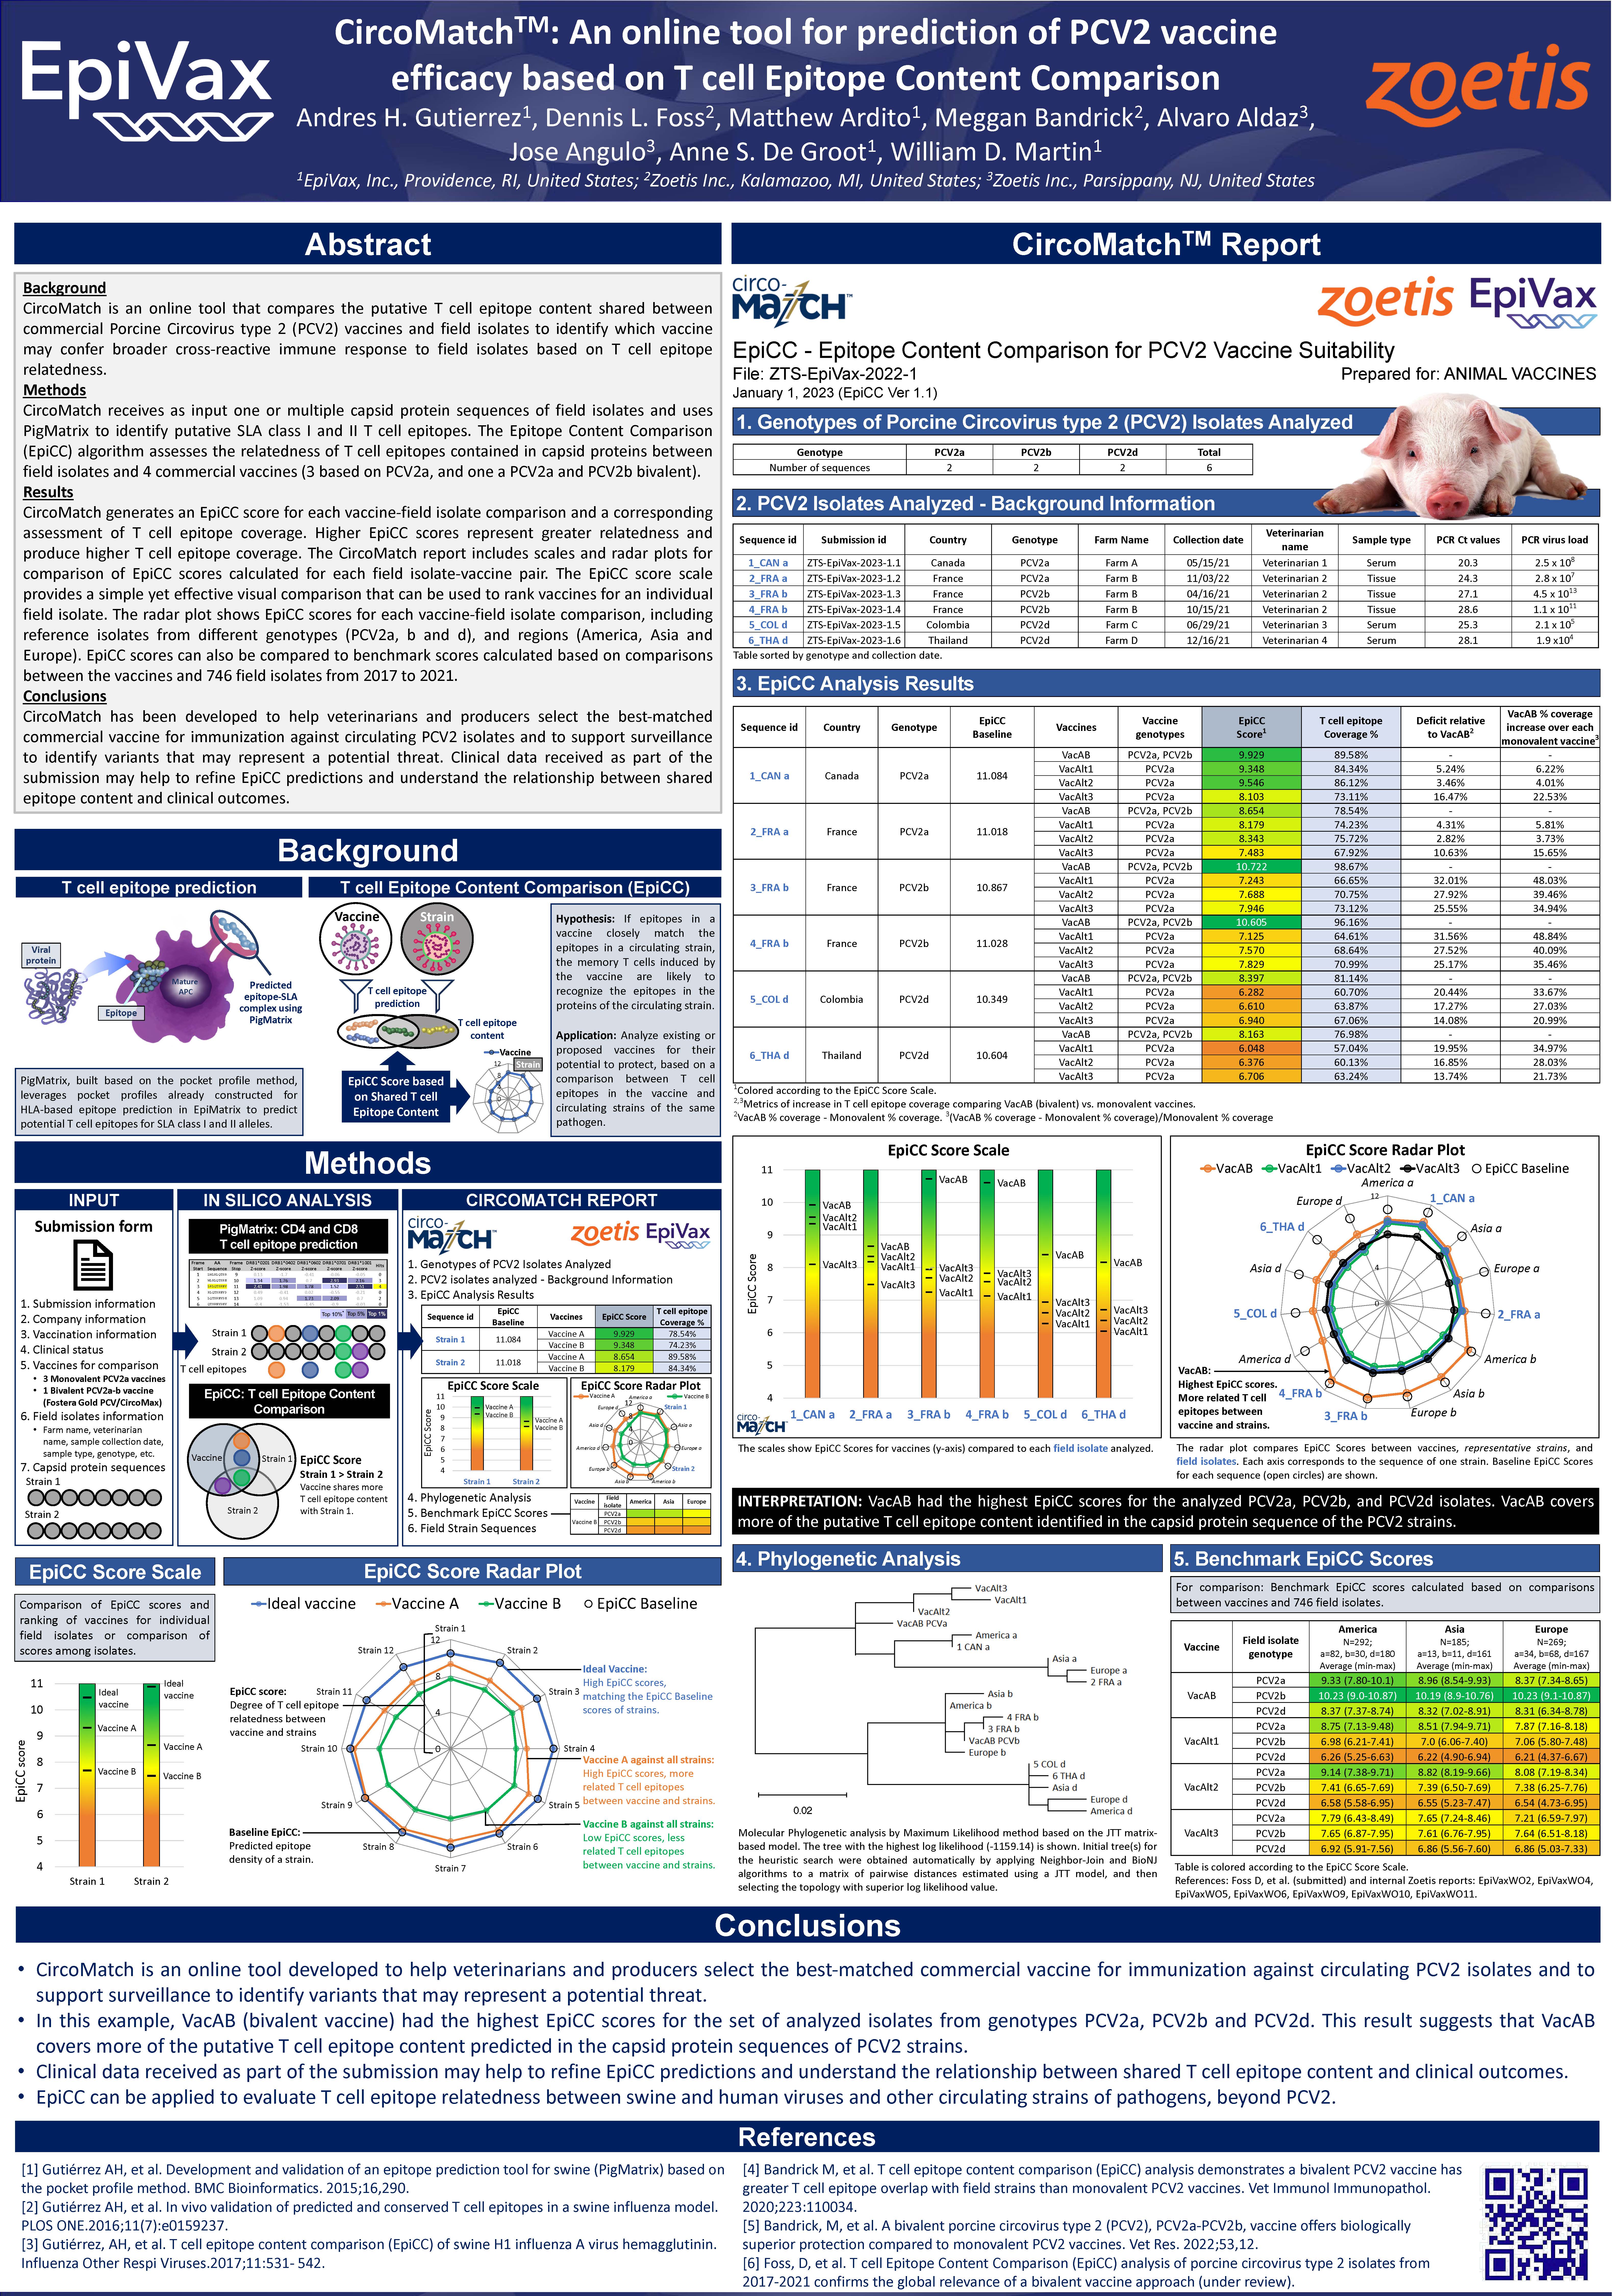 CircoMatchTM: An online tool for prediction of PCV2 vaccine efficacy based on T cell Epitope Content Comparison